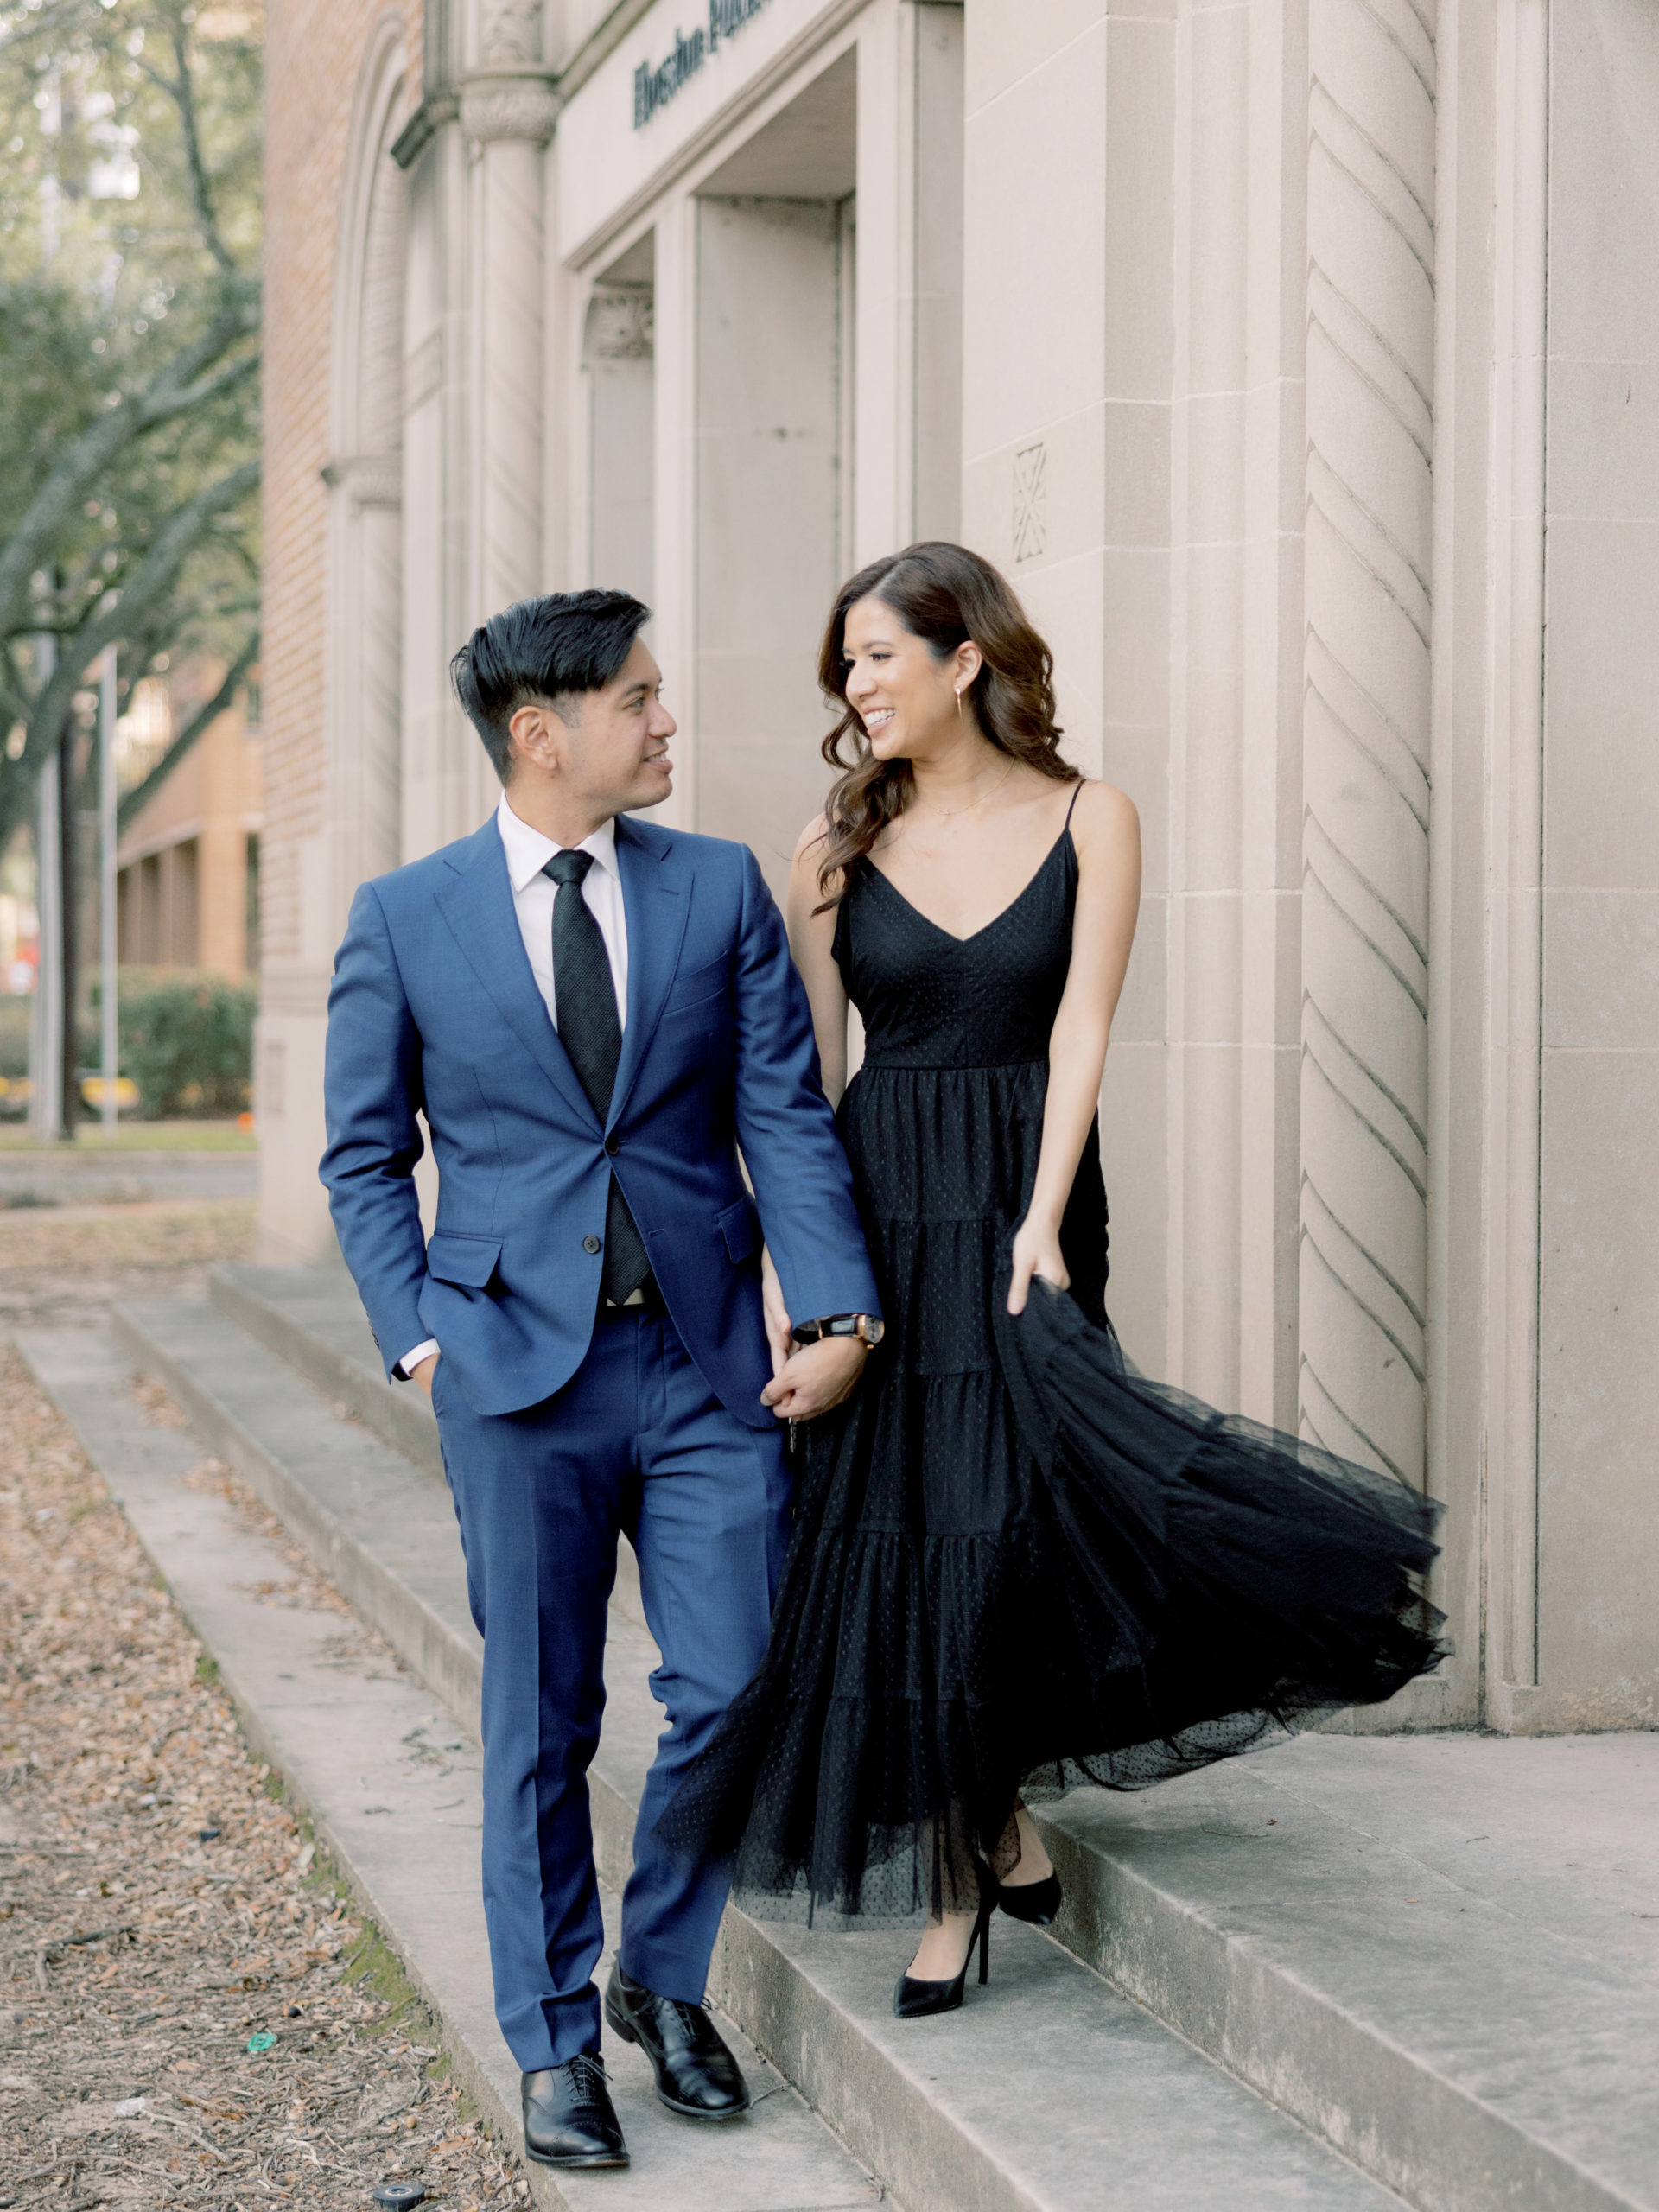 The engaged couple are happily walking while looking at each other. Engagement images by Jenny Fu Studio